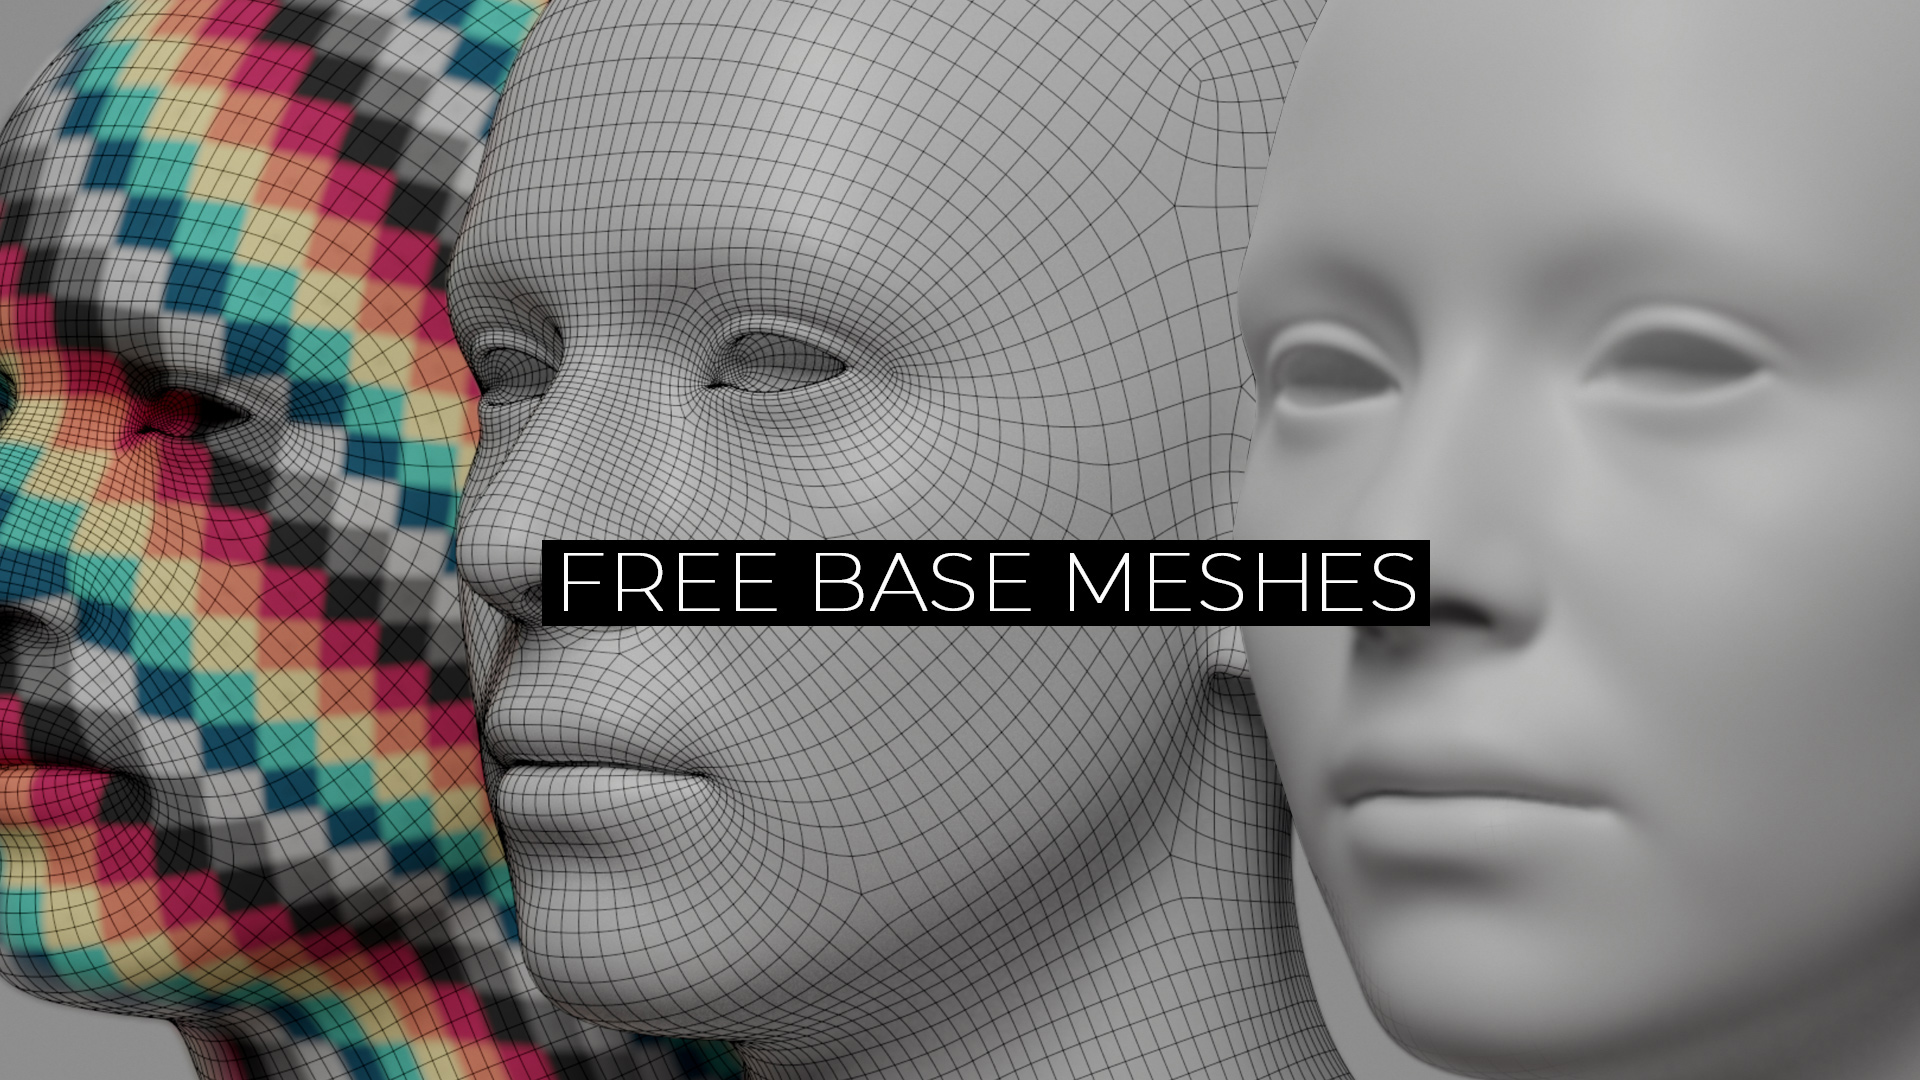 Free base meshes download